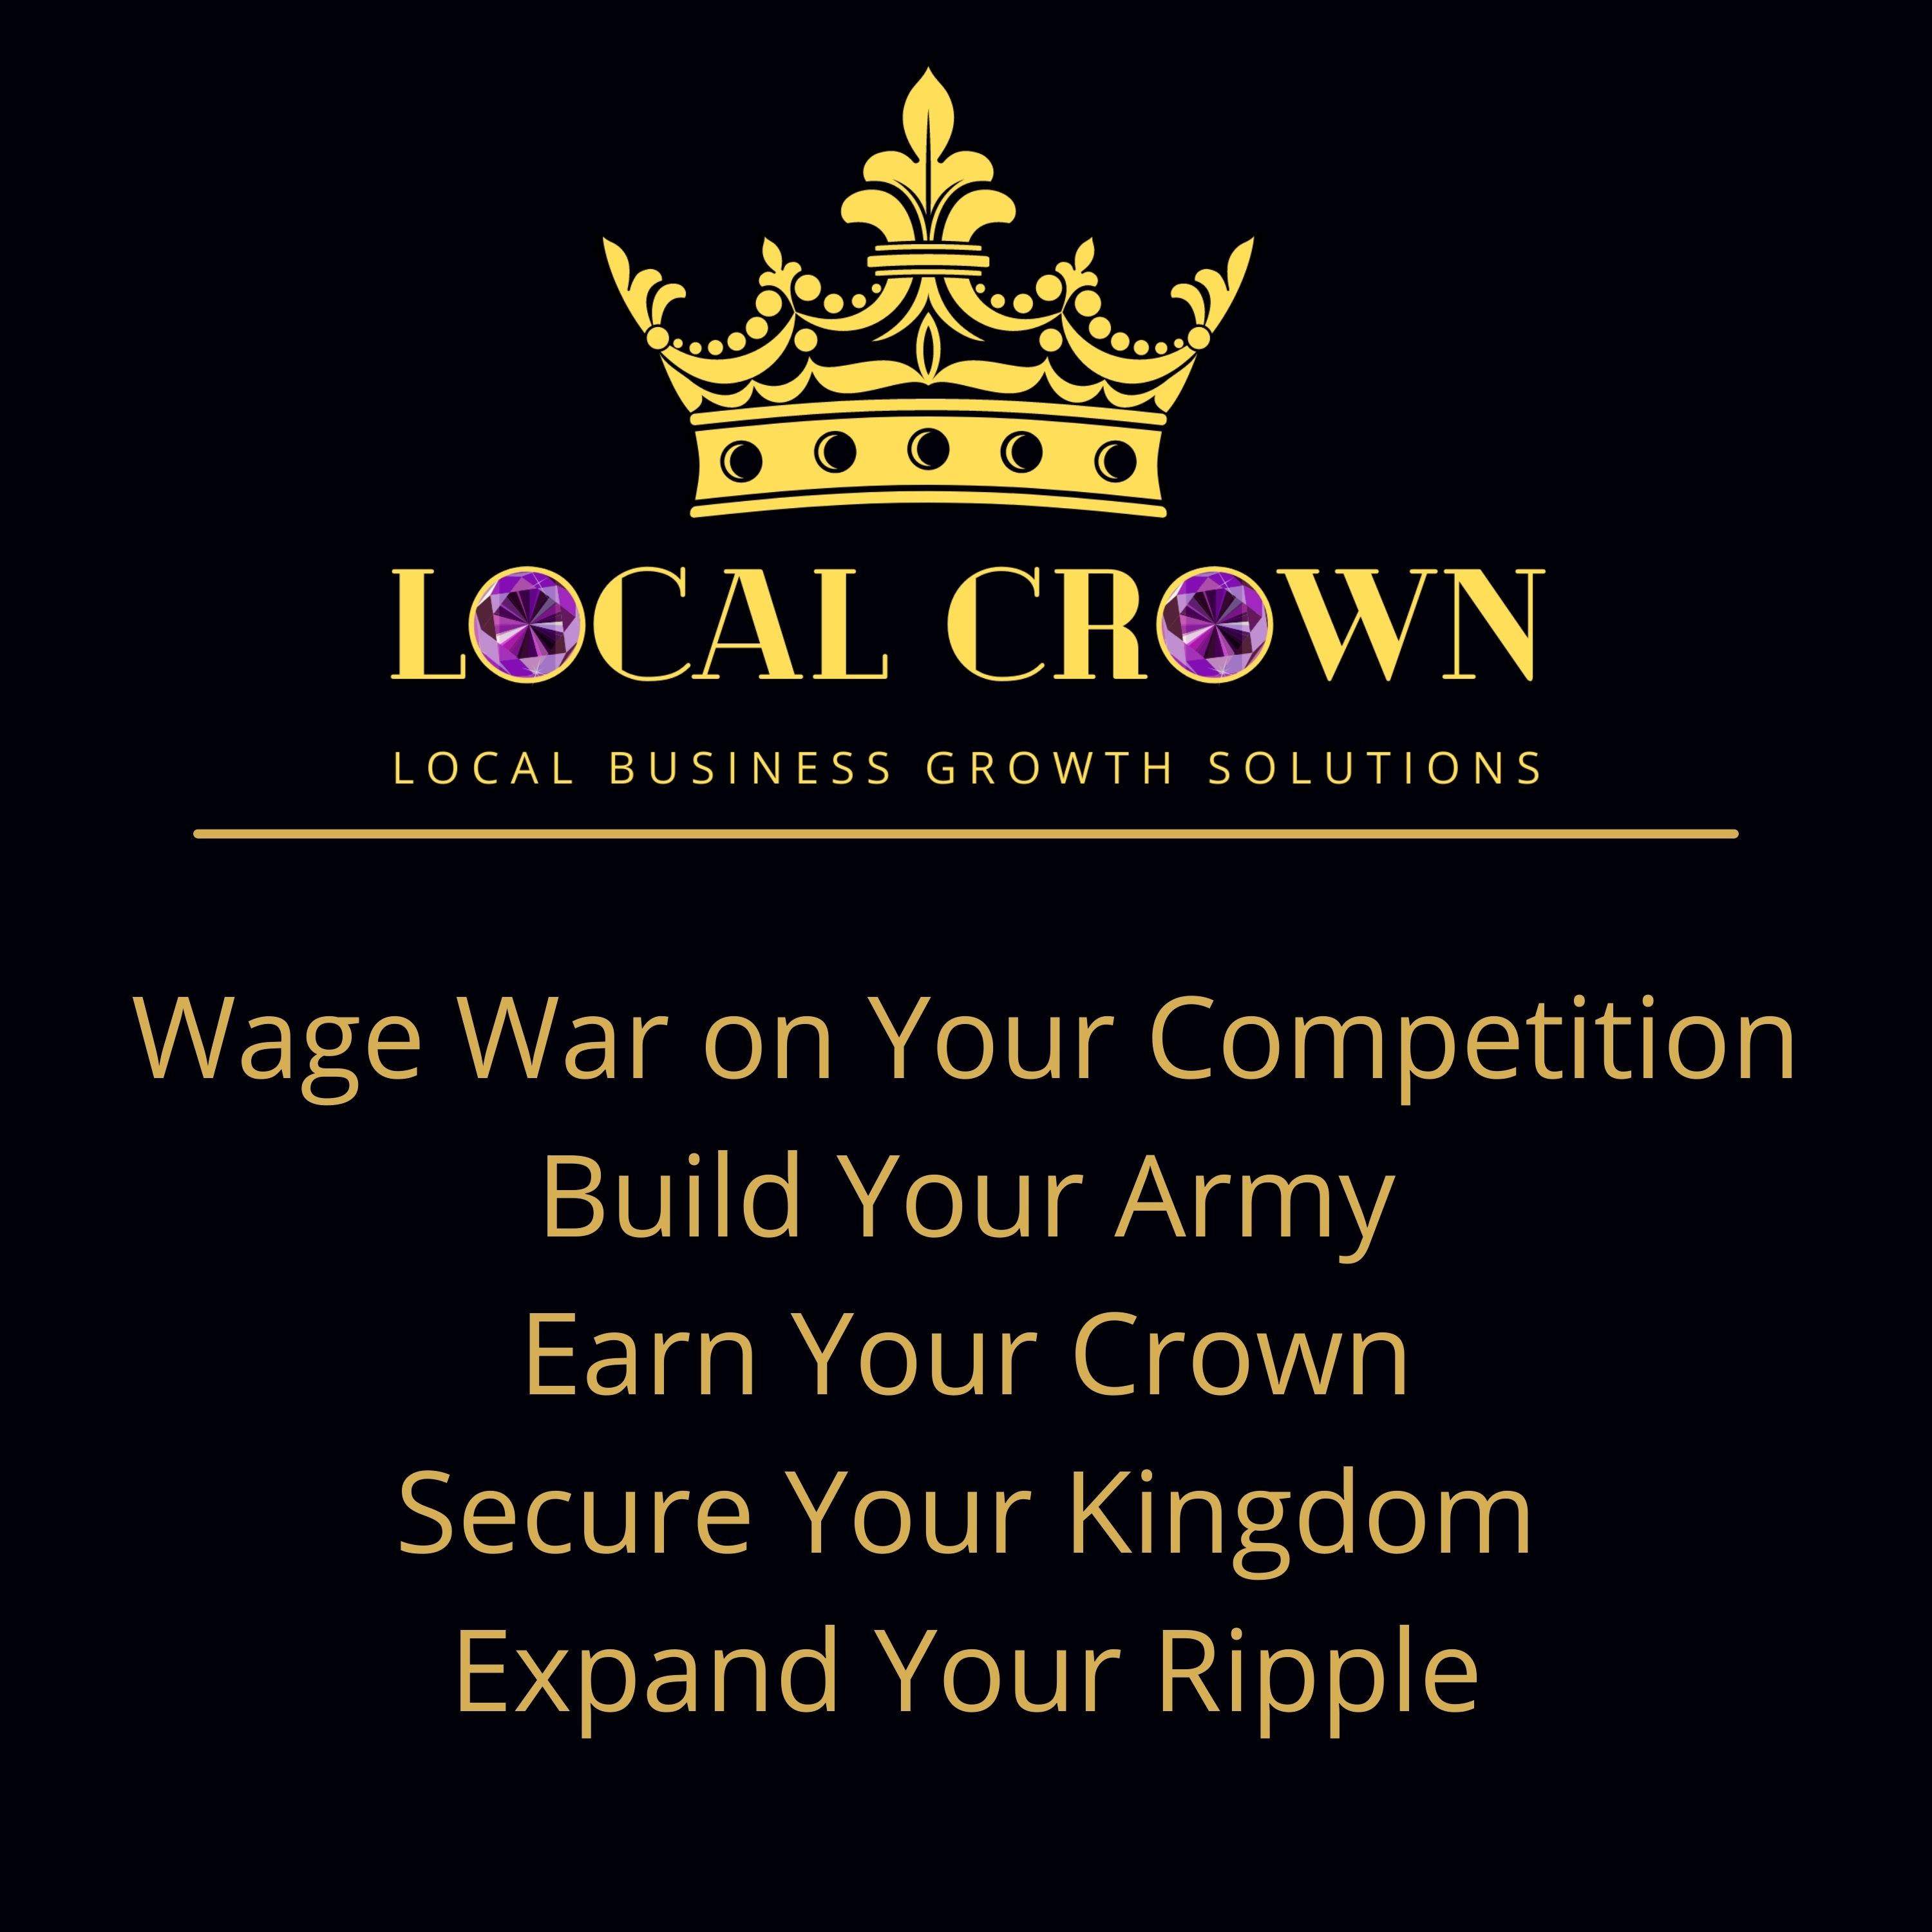 Artwork for Local Crown, LLC - Local Business Marketing and Consulting